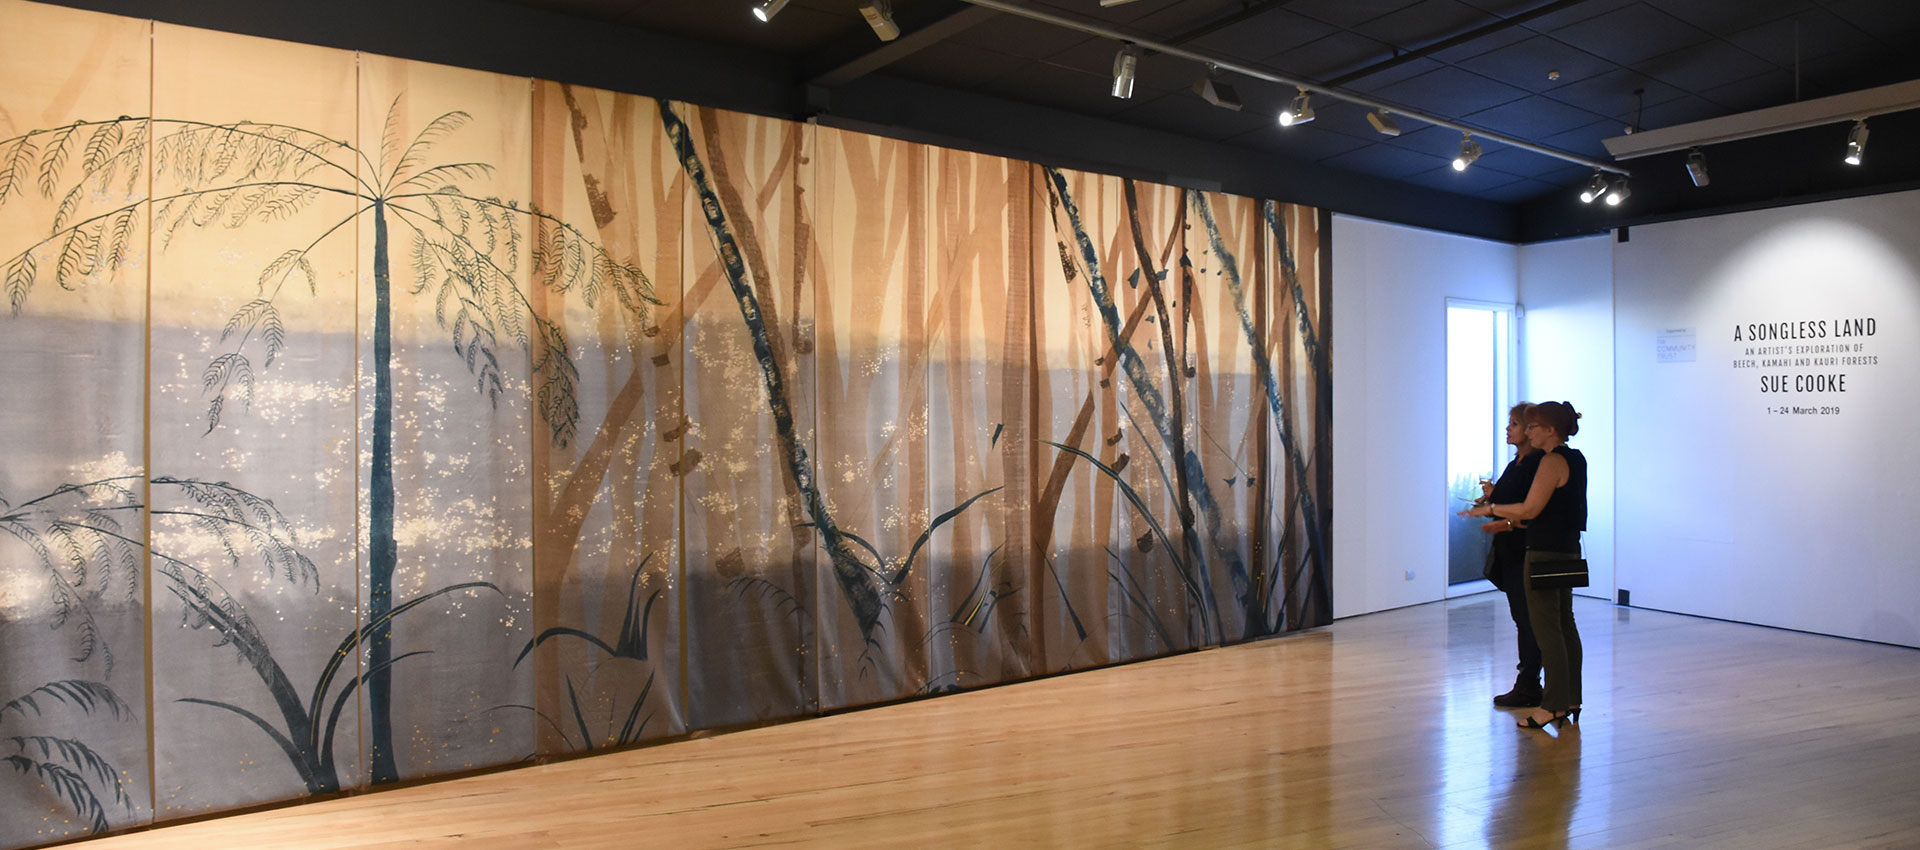 Large printed panels depicting regenerating forest stretch from floor to ceiling in an art gallery